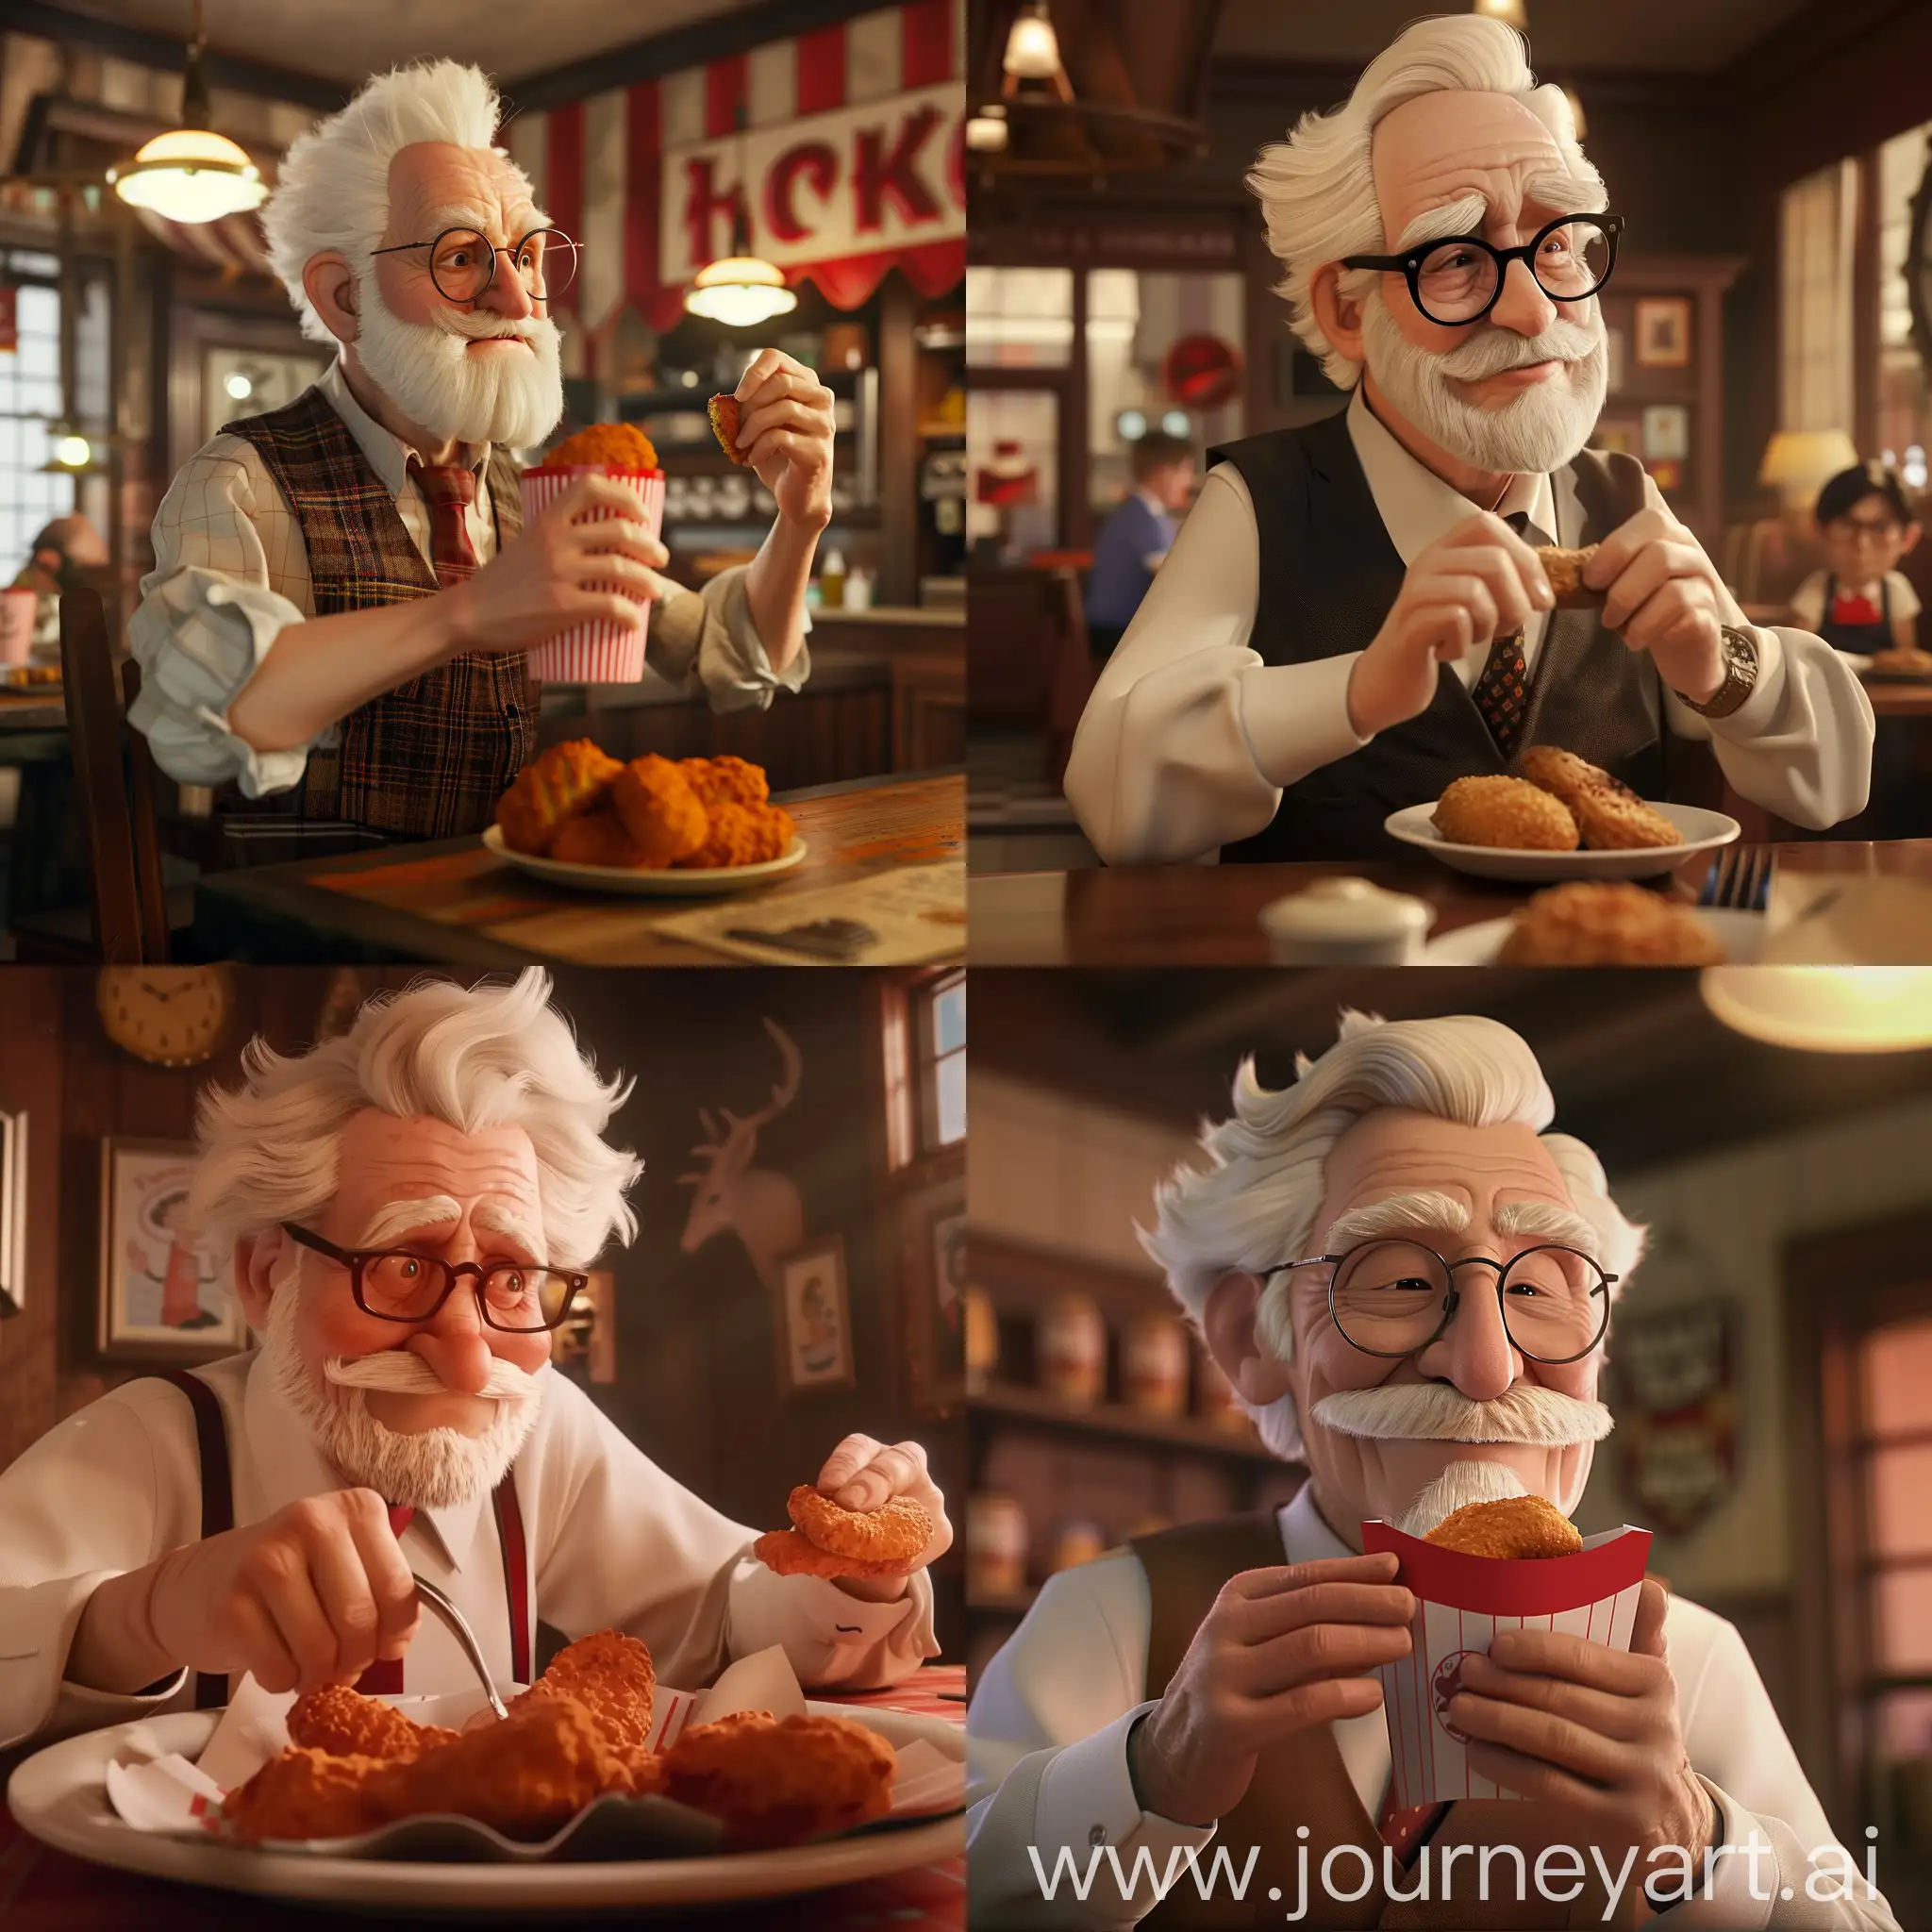 Colonel-Sanders-Enjoying-Nuggets-at-a-Restaurant-3D-Animation